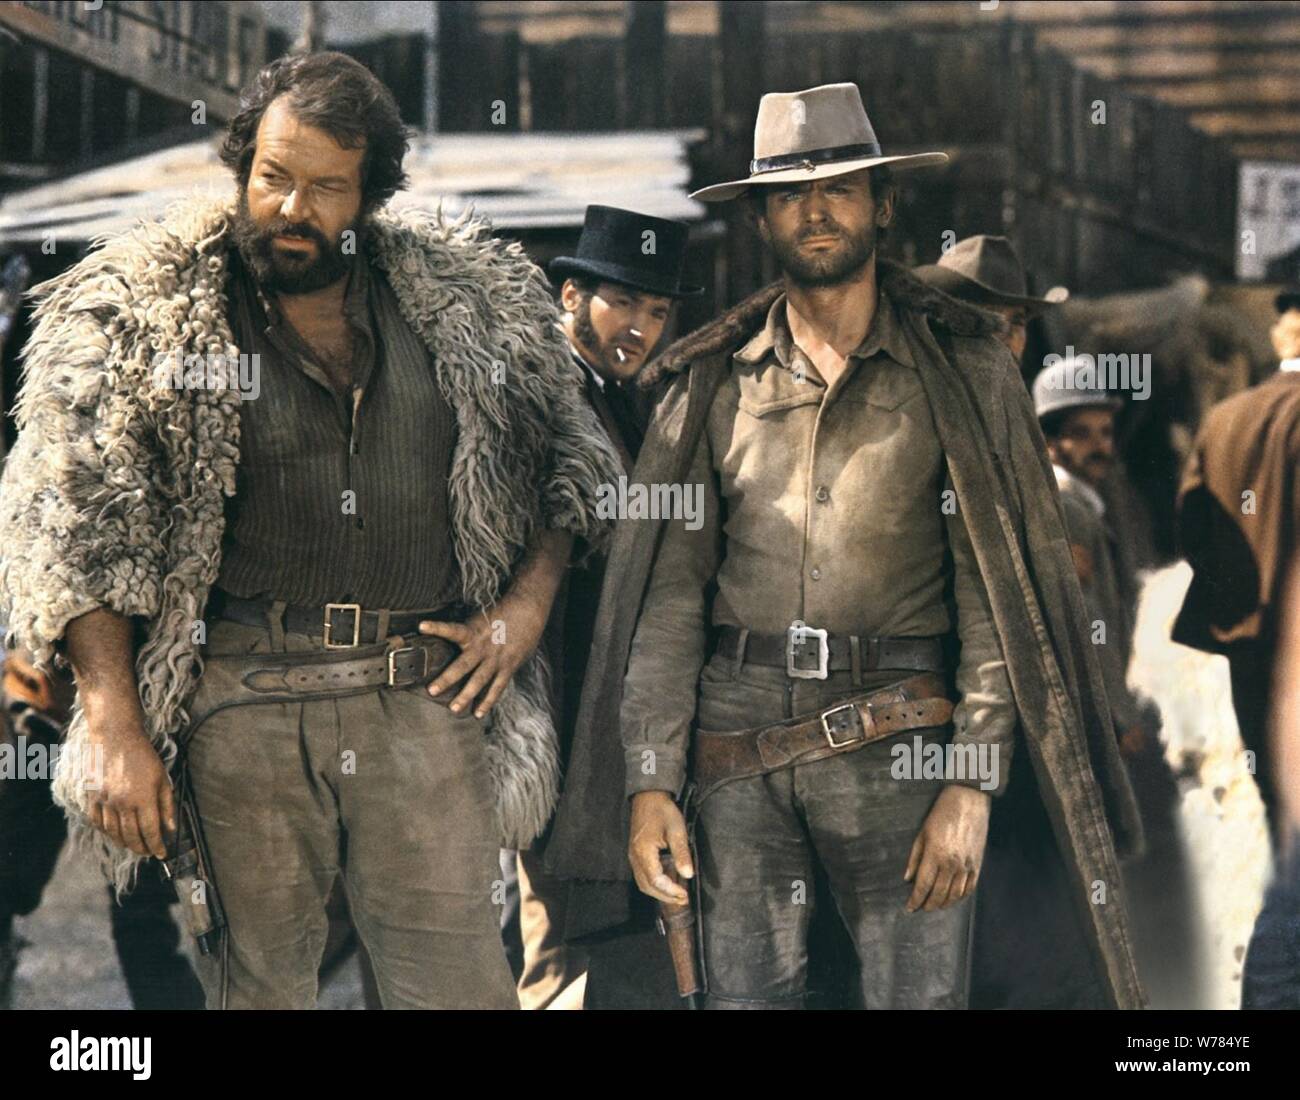 BUD SPENCER, TERENCE HILL, ACE HIGH, 1968 Stock Photo - Alamy